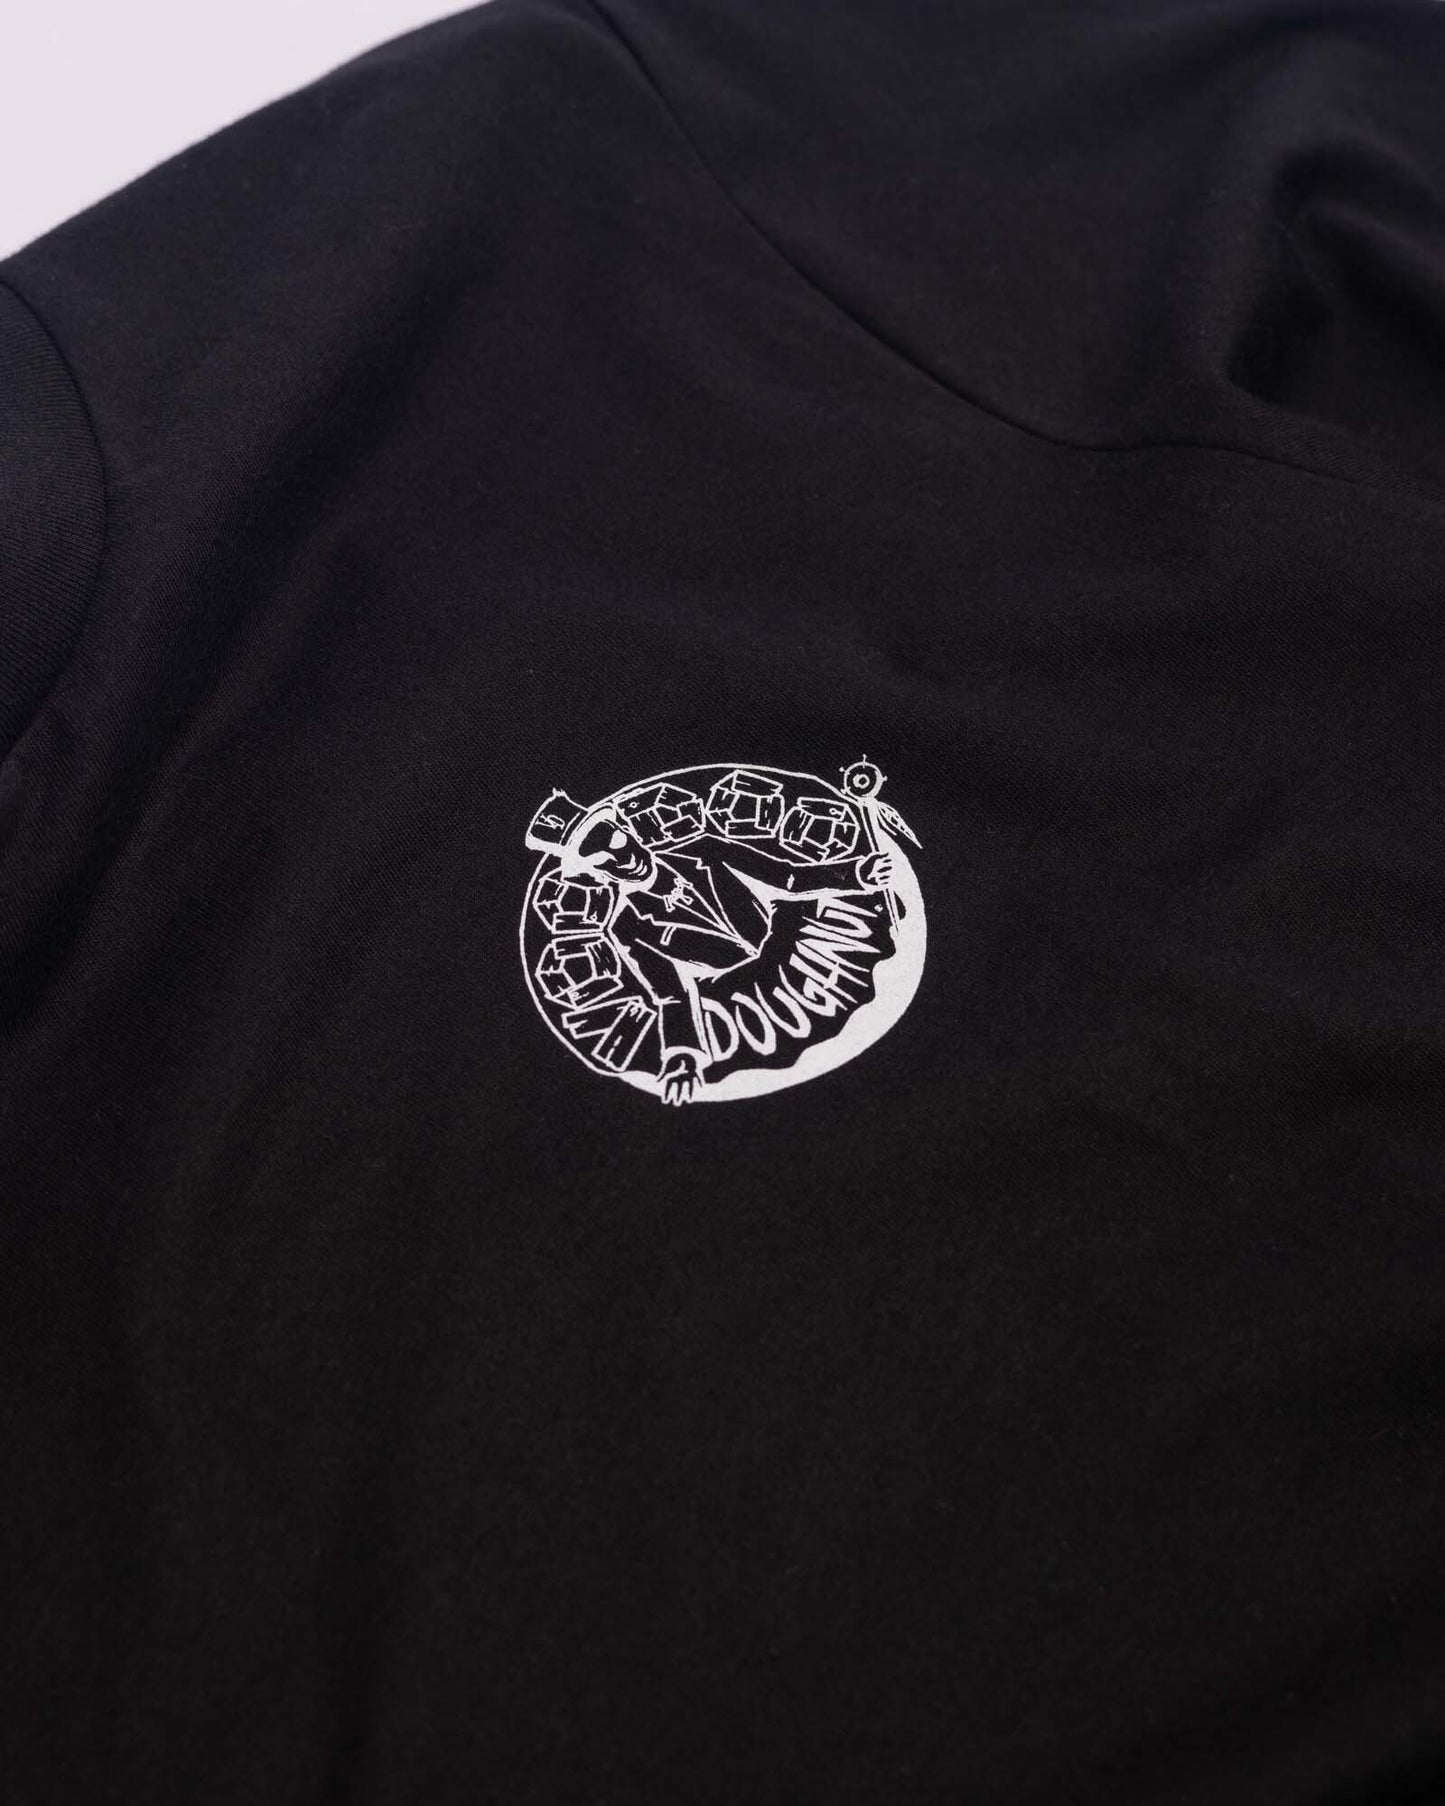 black t-shirt with white voodoo baron logo on front left chest